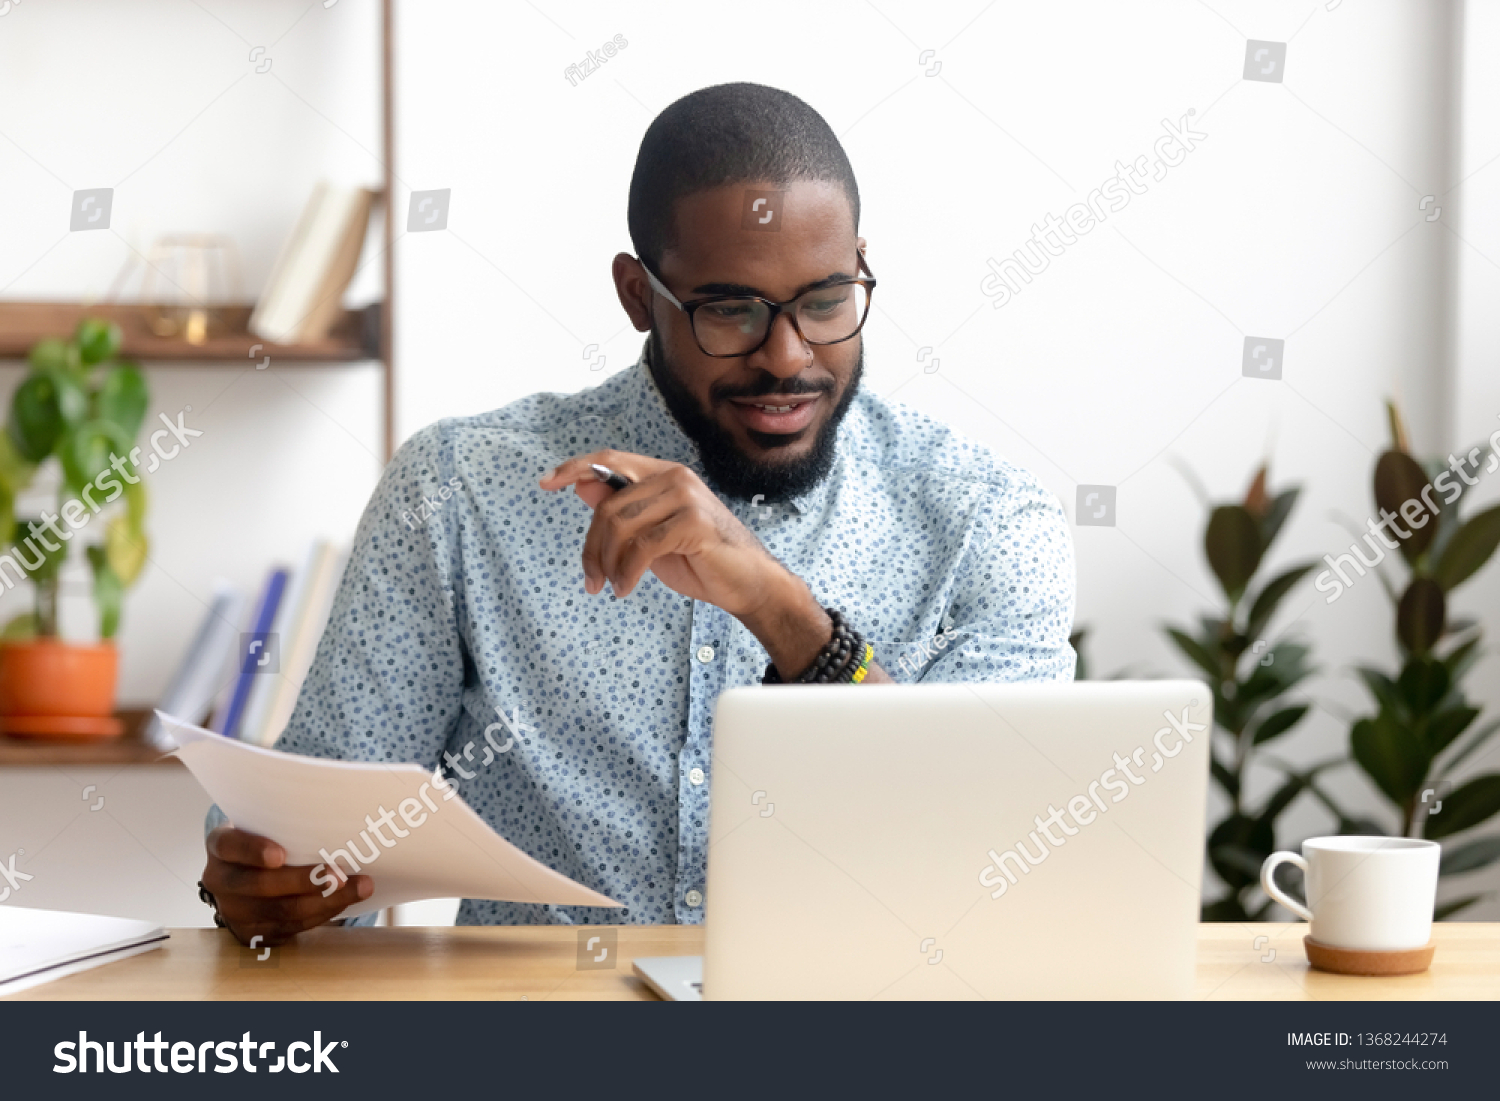 Focused african american businessman working with laptop documents in office holding papers preparing report analyzing work results, black male analyst doing paperwork at workplace using computer #1368244274